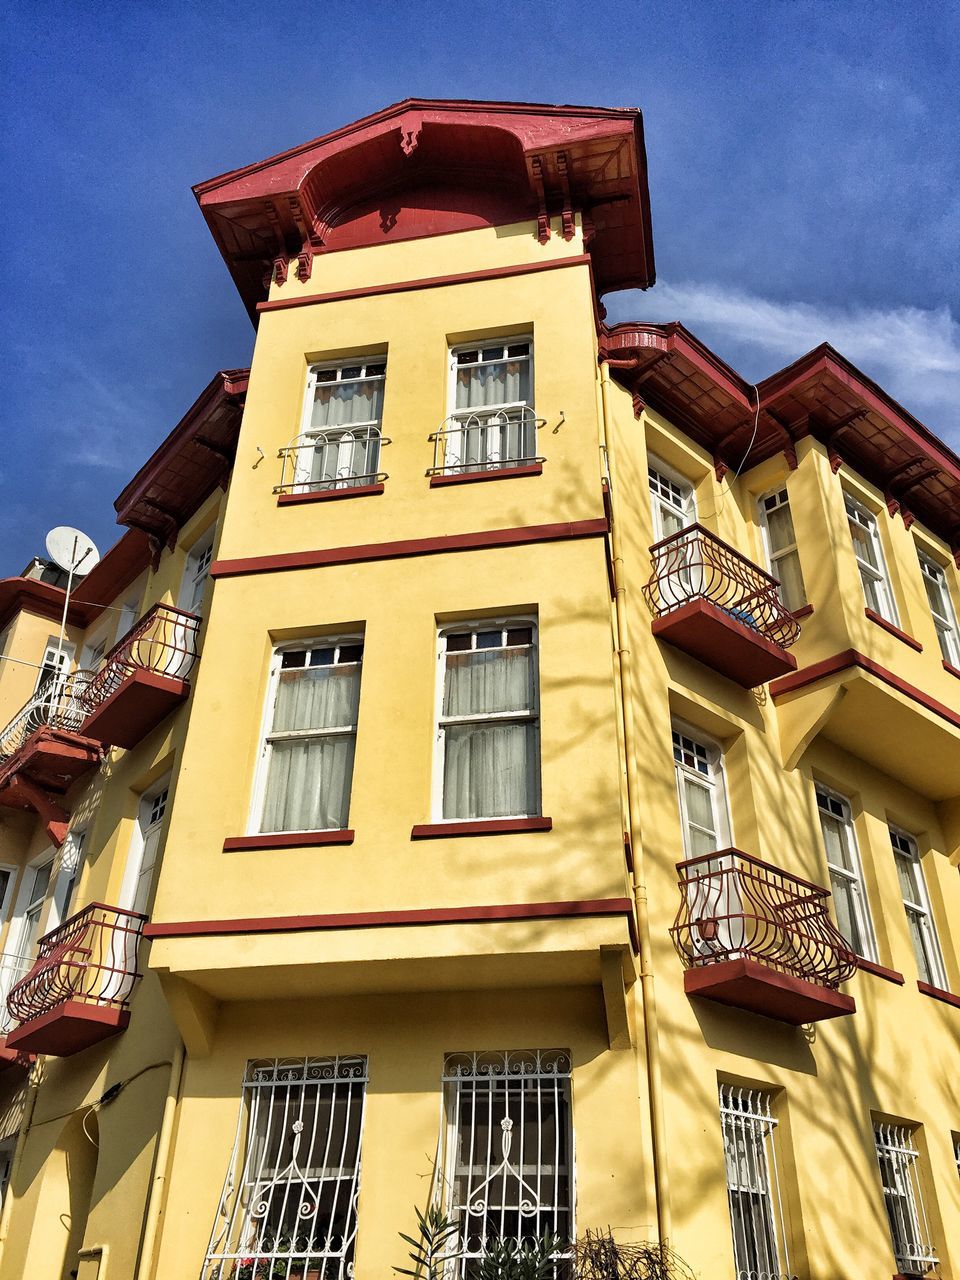 building exterior, architecture, window, low angle view, built structure, balcony, sky, yellow, outdoors, no people, day, city